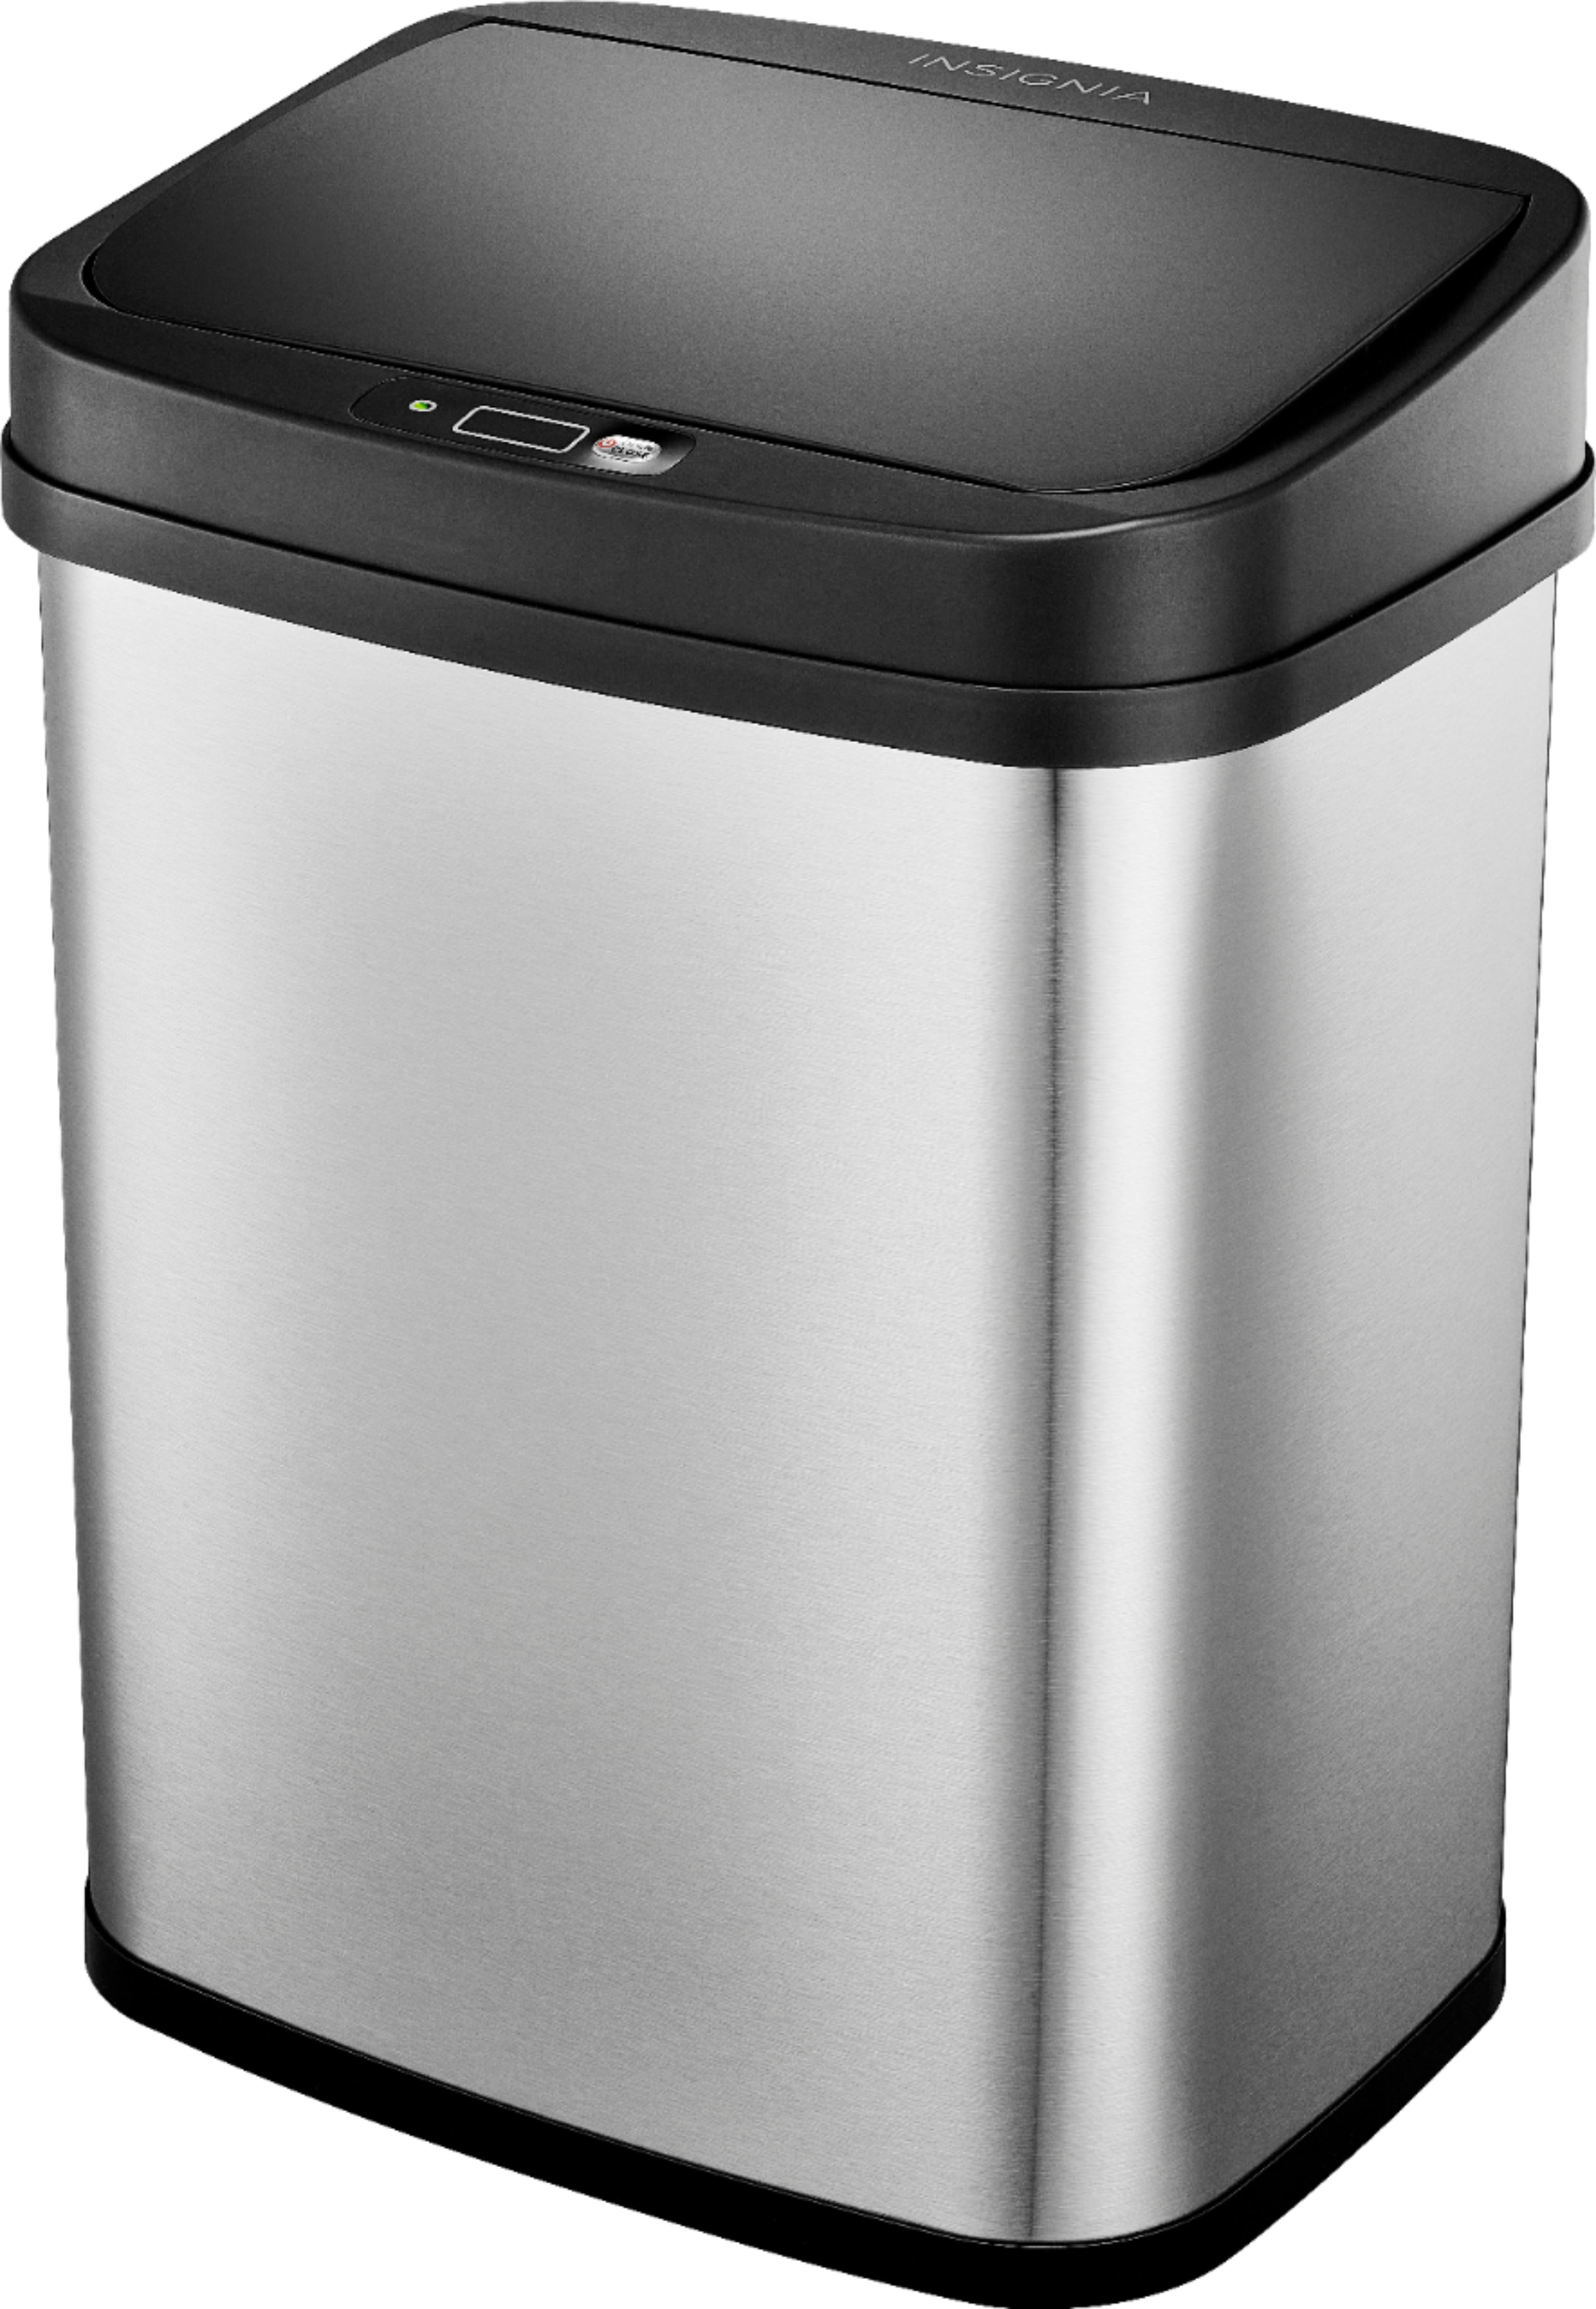 Insignia 3 Gal. Automatic Trash Can Stainless steel - $20 at Bestbuy